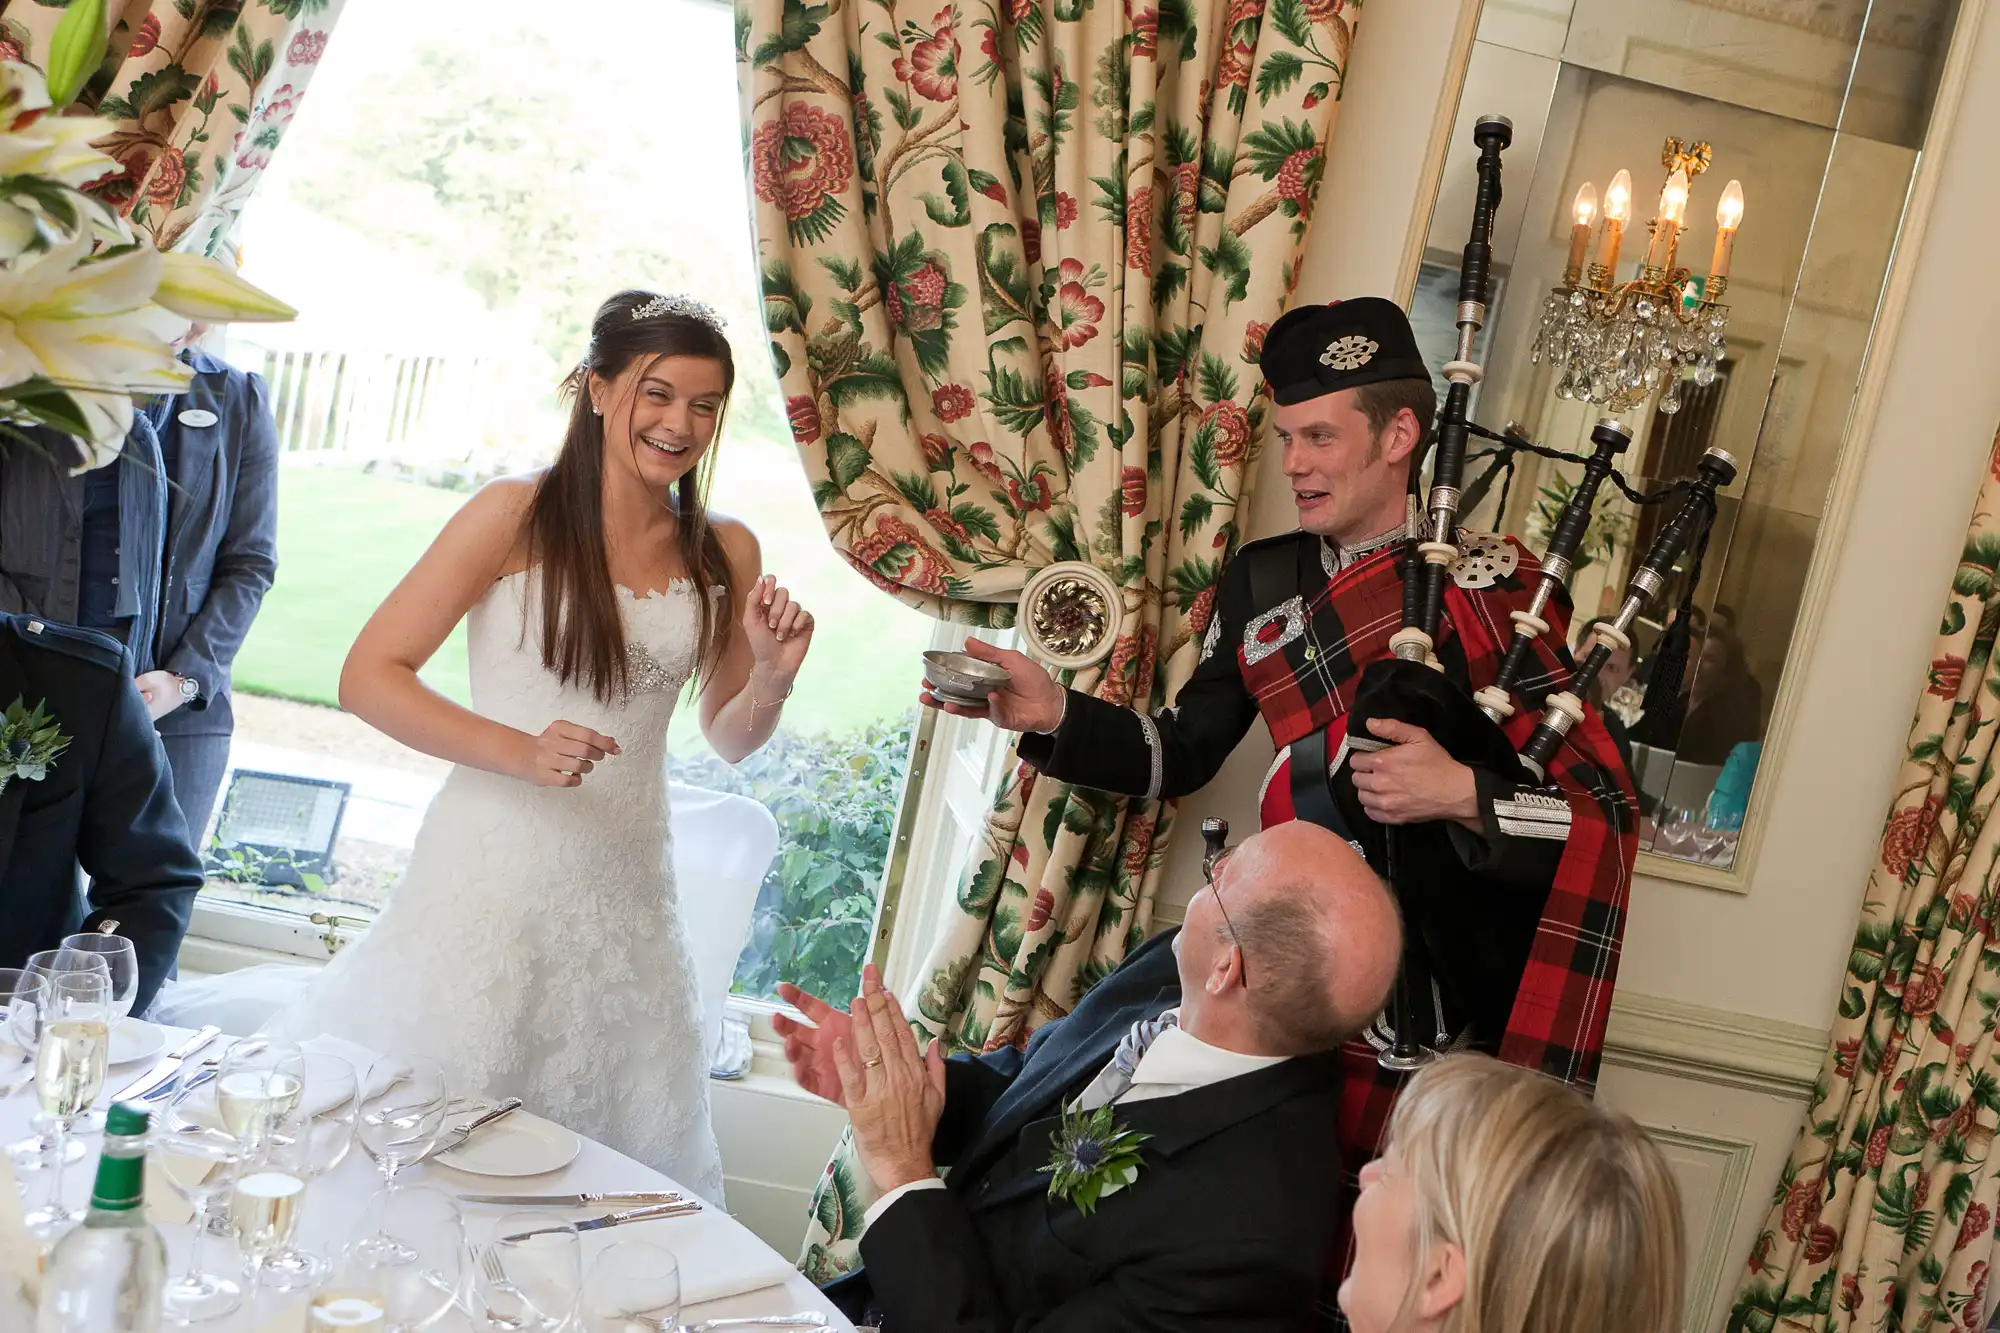 A bride laughs joyfully beside a bagpiper in a kilt at a wedding reception, with guests and elegant decor around them.